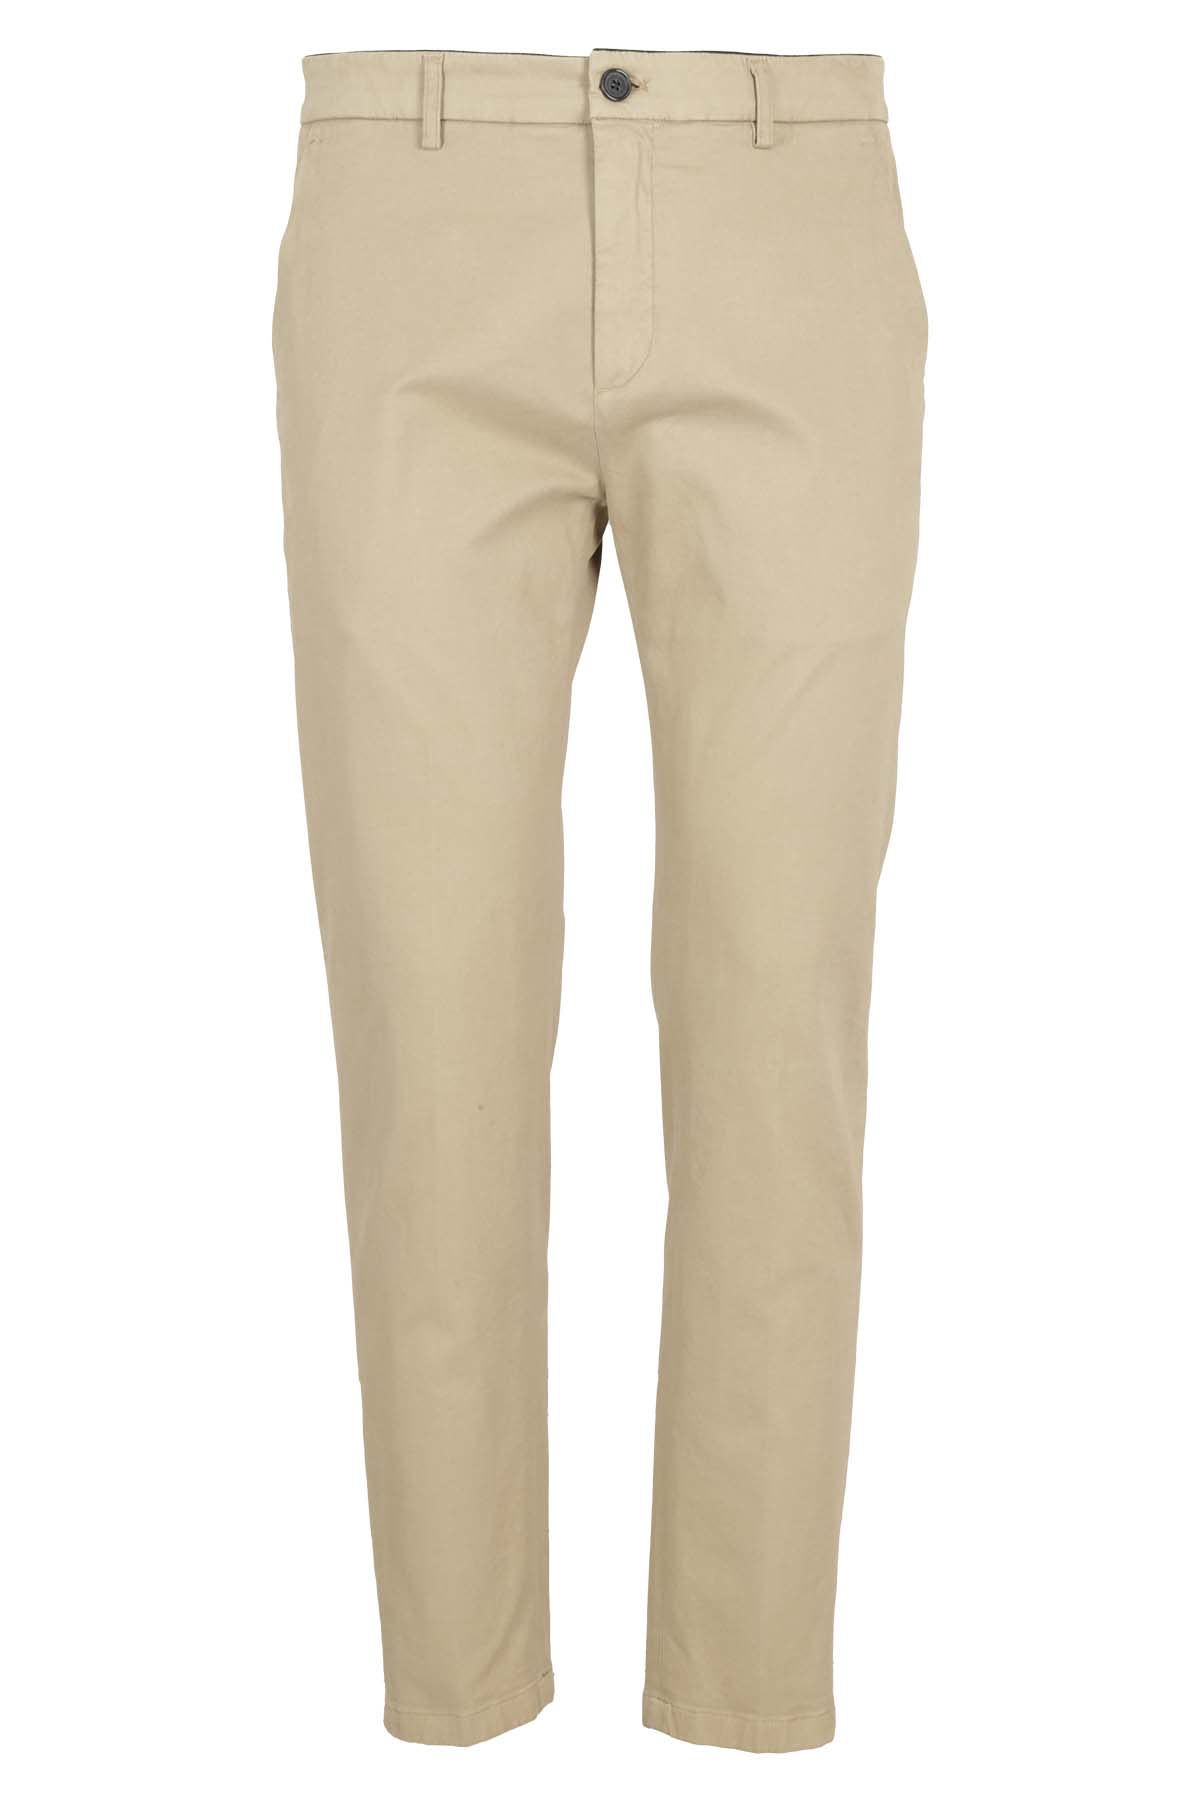 DEPARTMENT FIVE PRINCE CHINOS